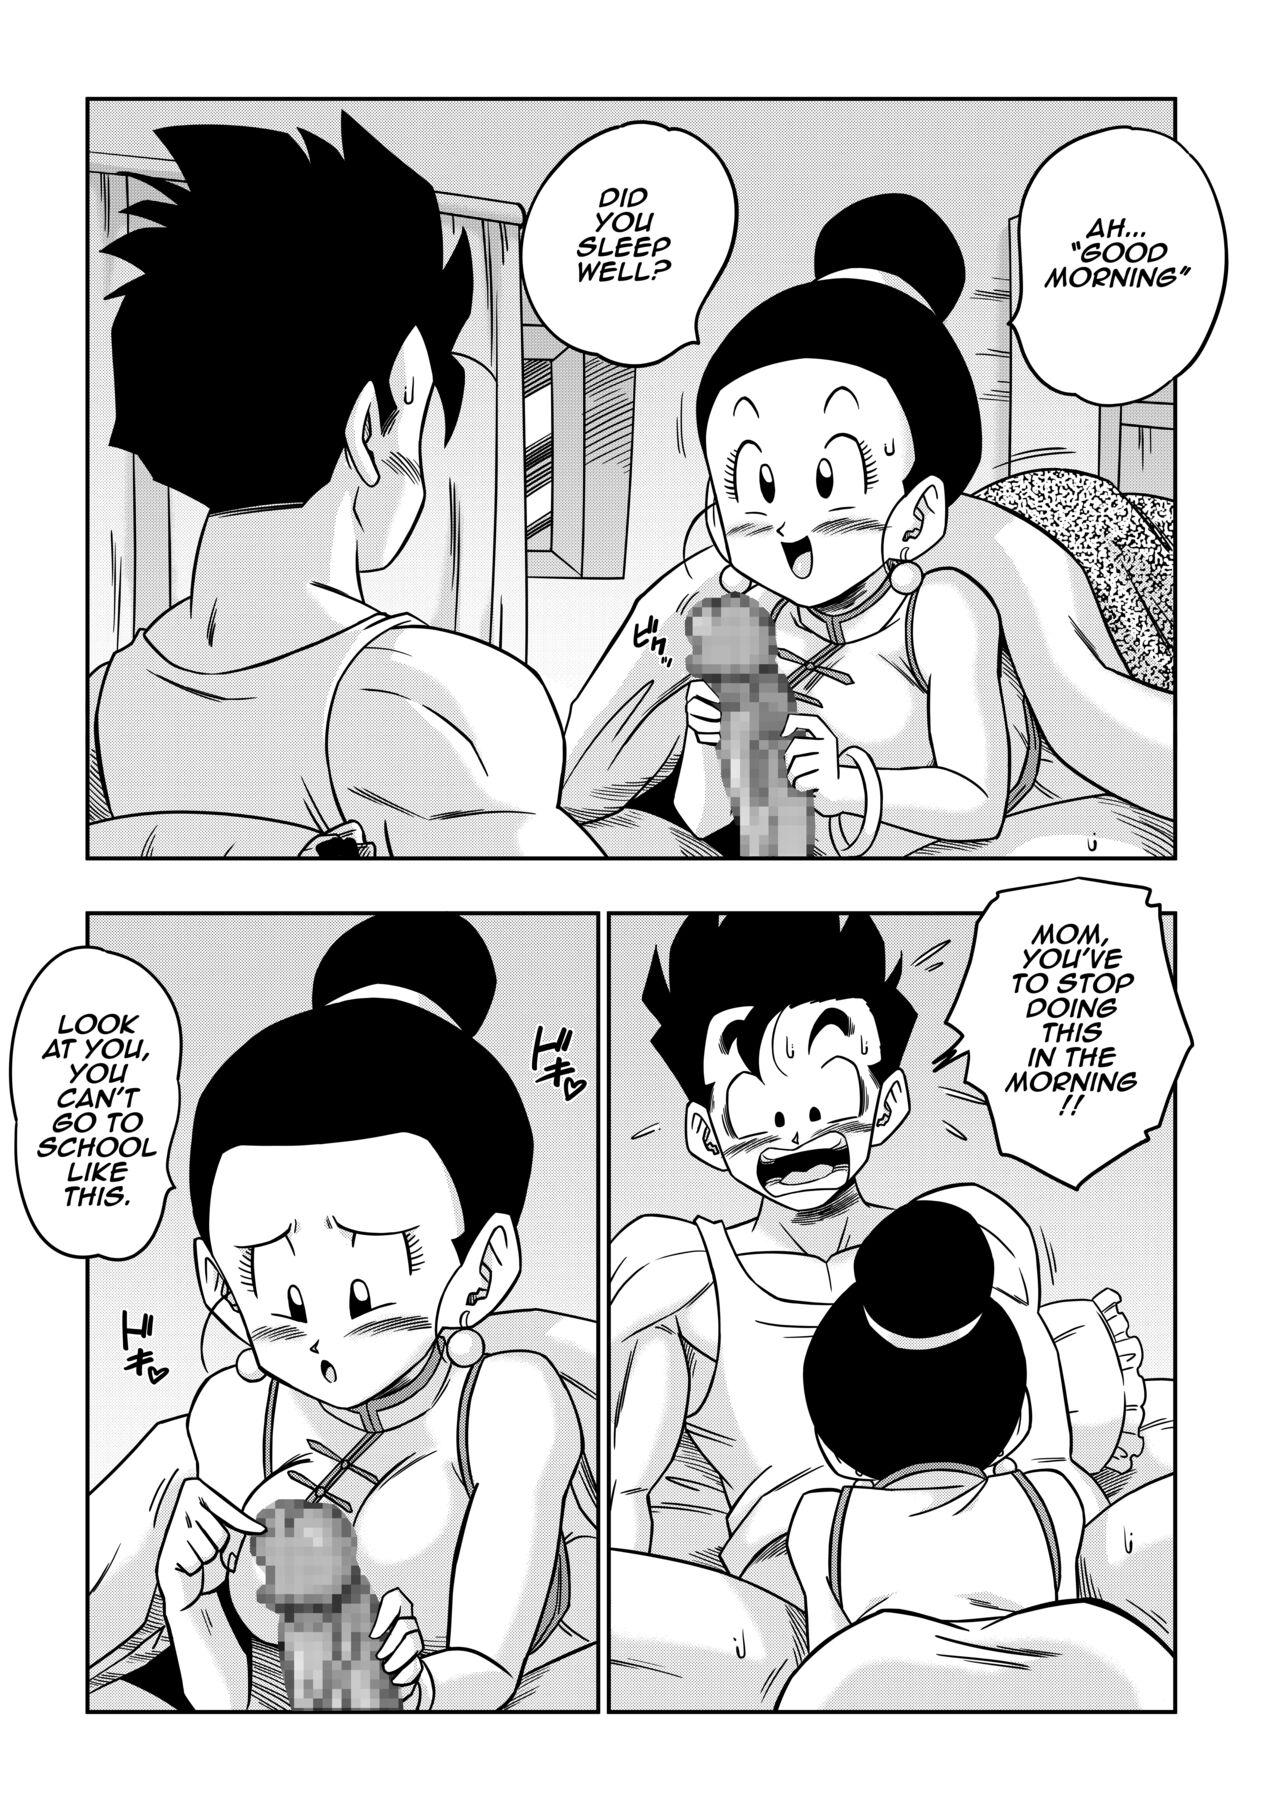 Hidden Cam LOVE TRIANGLE Z PART 5 - Dragon ball z All Natural - Page 4